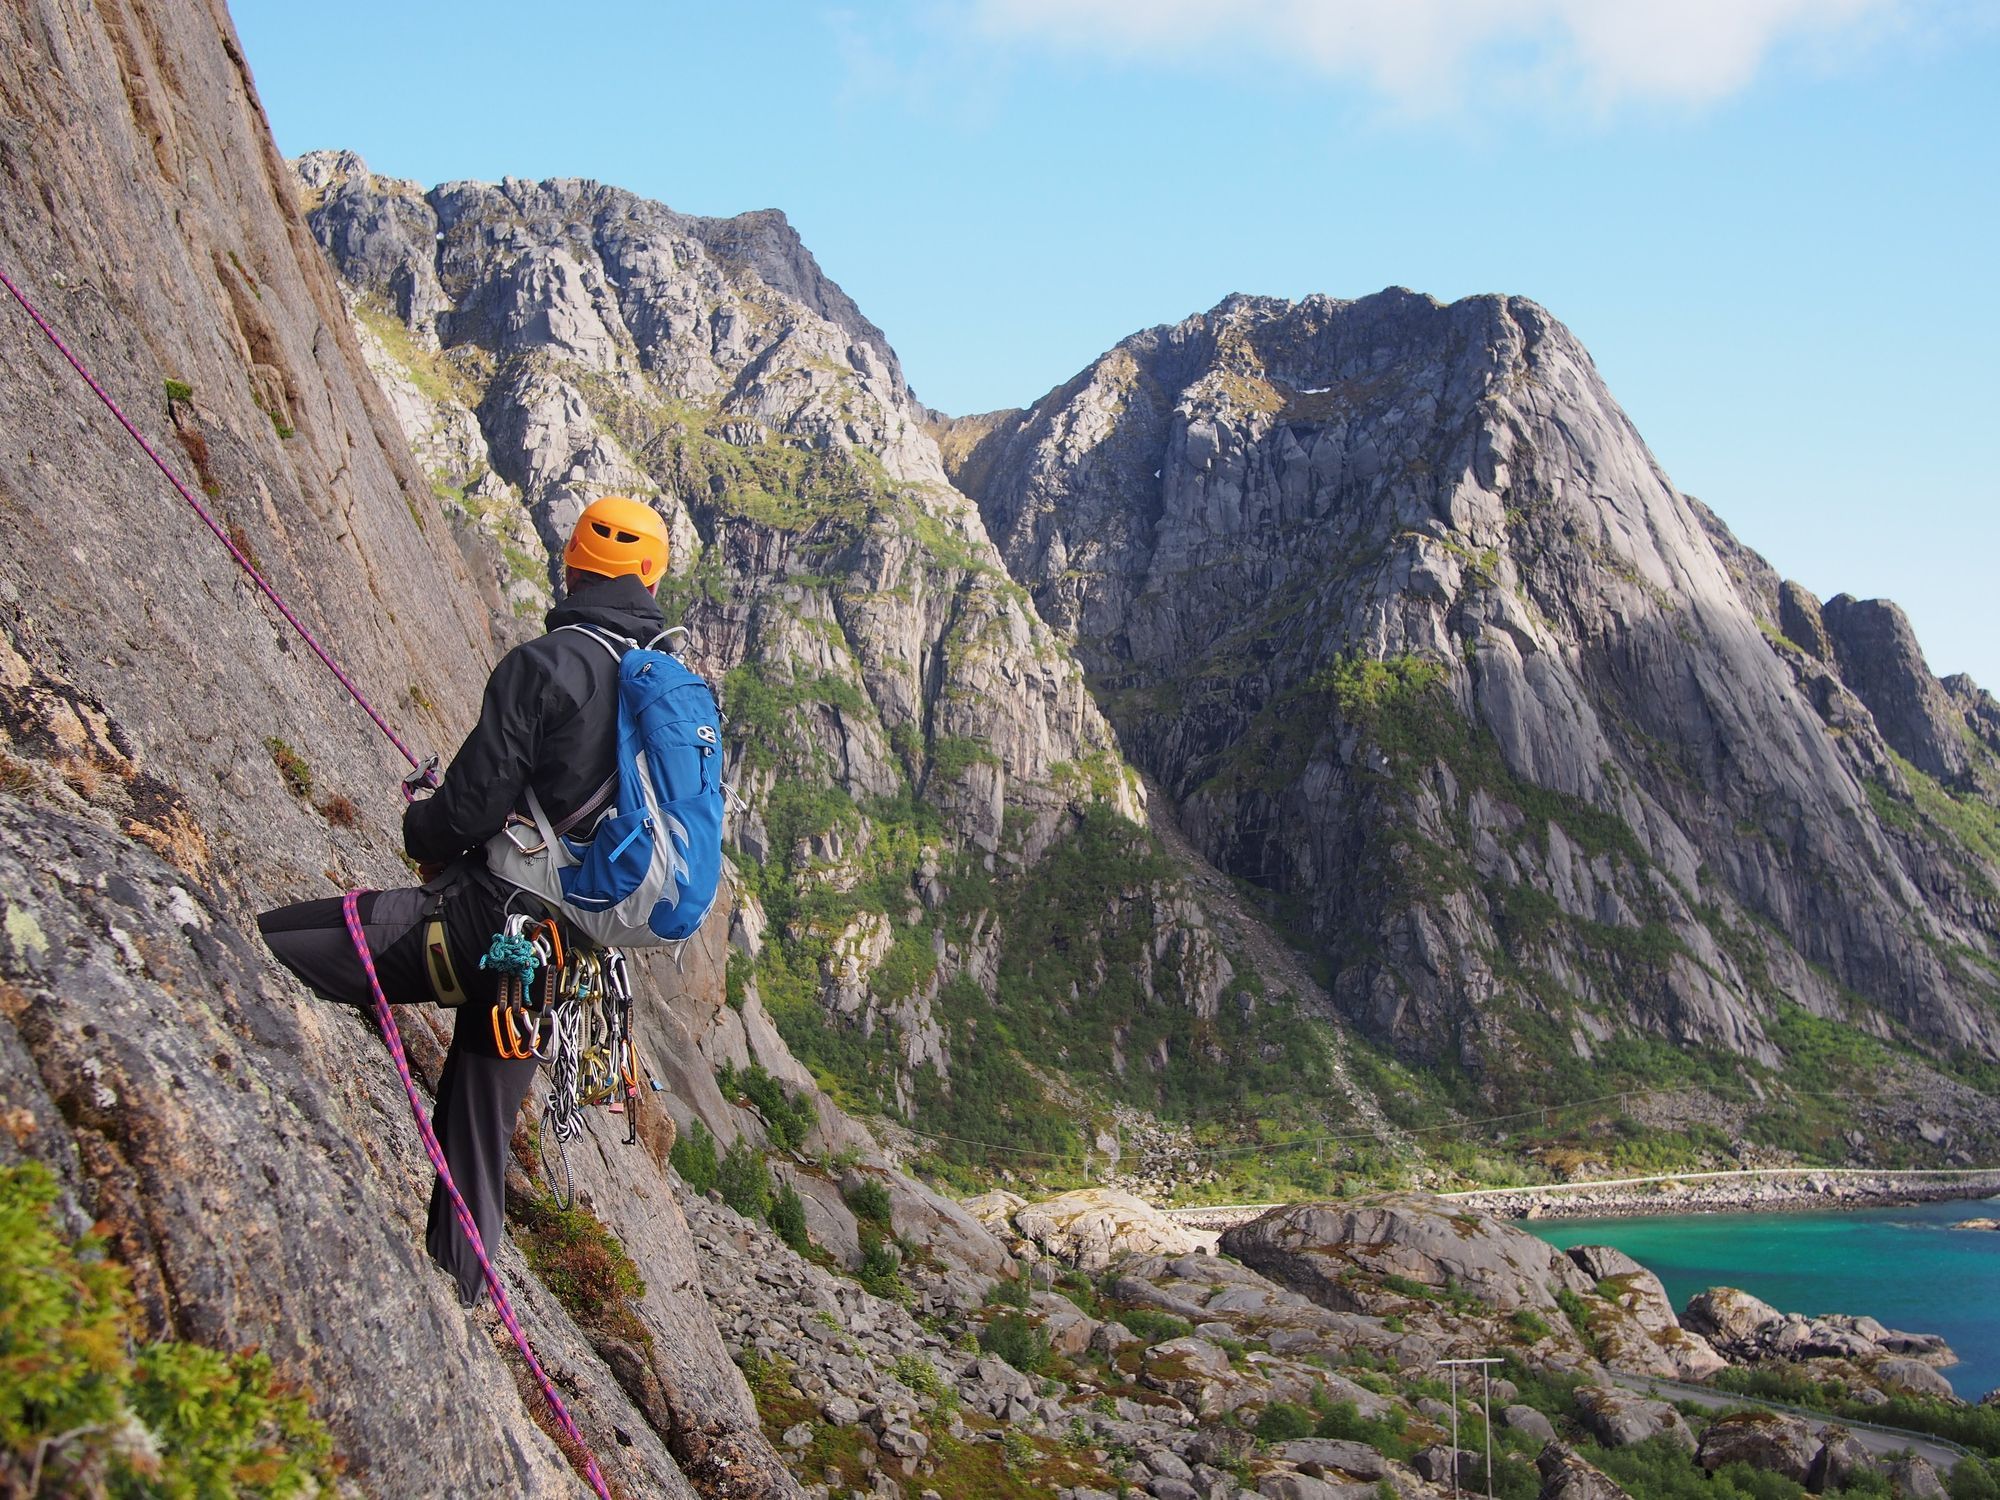 A rock climber gets ready to scale a granite cliff on the Lofoten Islands, Norway.